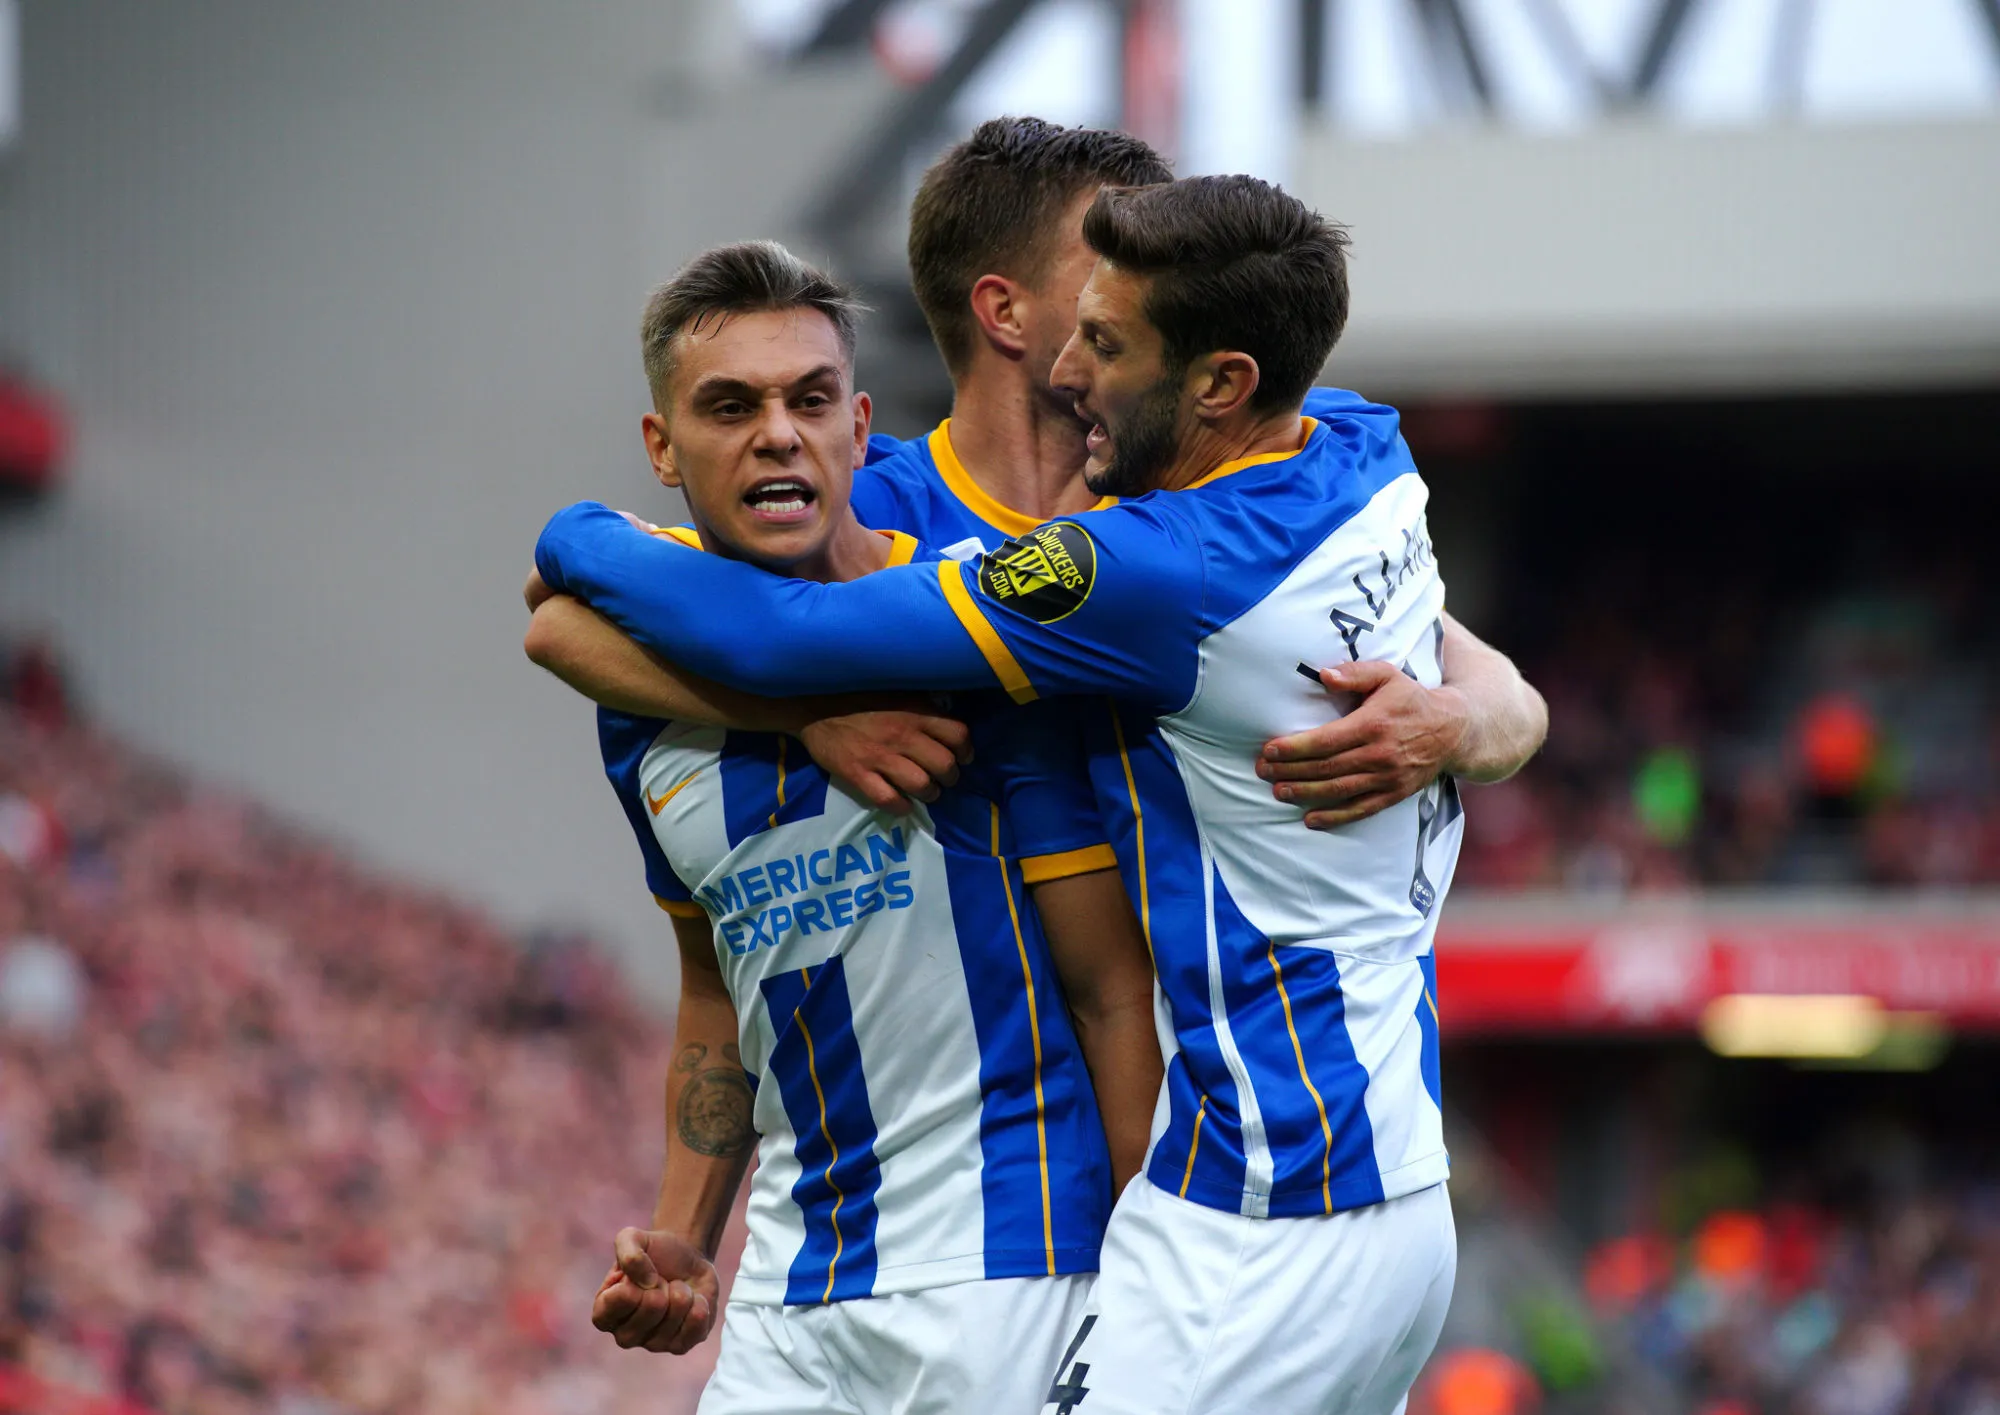 Brighton and Hove Albion's Leandro Trossard celebrates scoring their side's third goal of the game, completing his hat-trick, during the Premier League match at Anfield, Liverpool. Picture date: Saturday October 1, 2022. - Photo by Icon sport